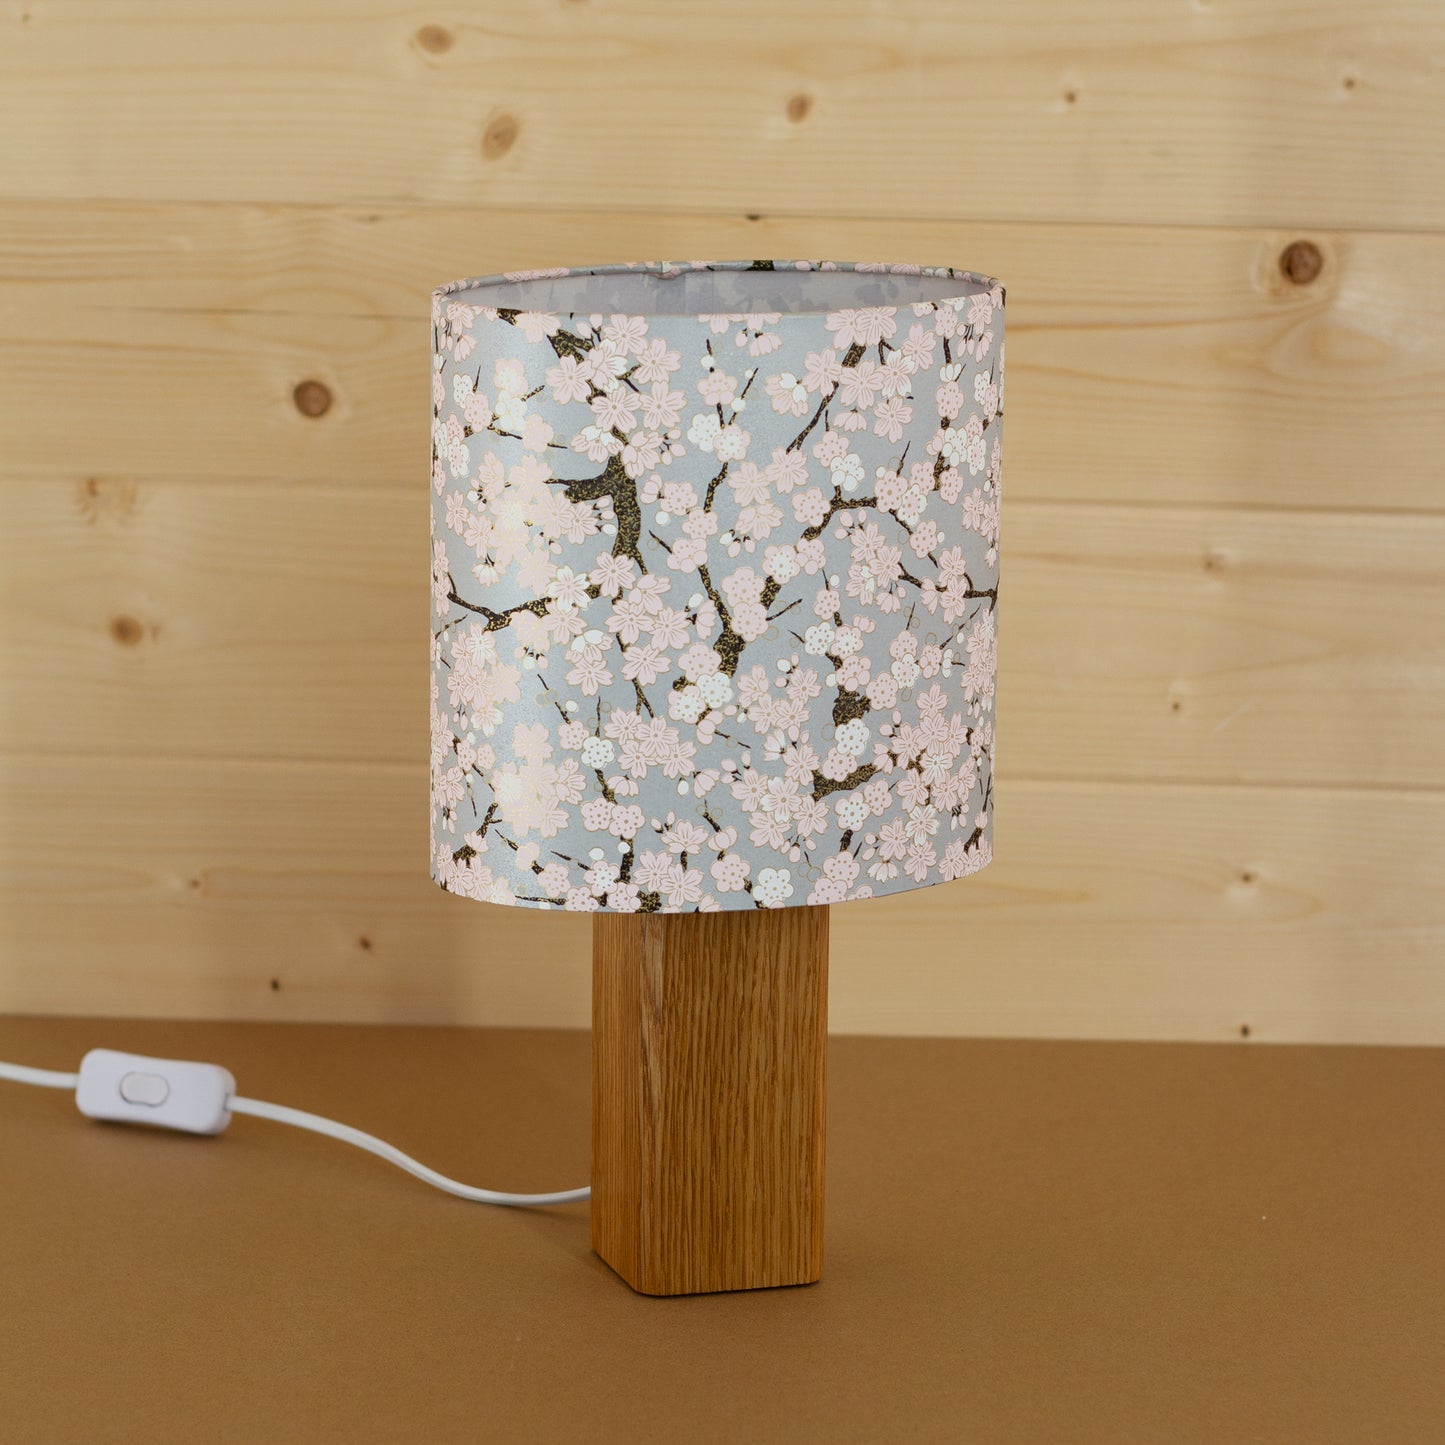 Square Oak Table Lamp with 20cm Oval Lamp Shade W02 ~ Pink Cherry Blossom on Grey